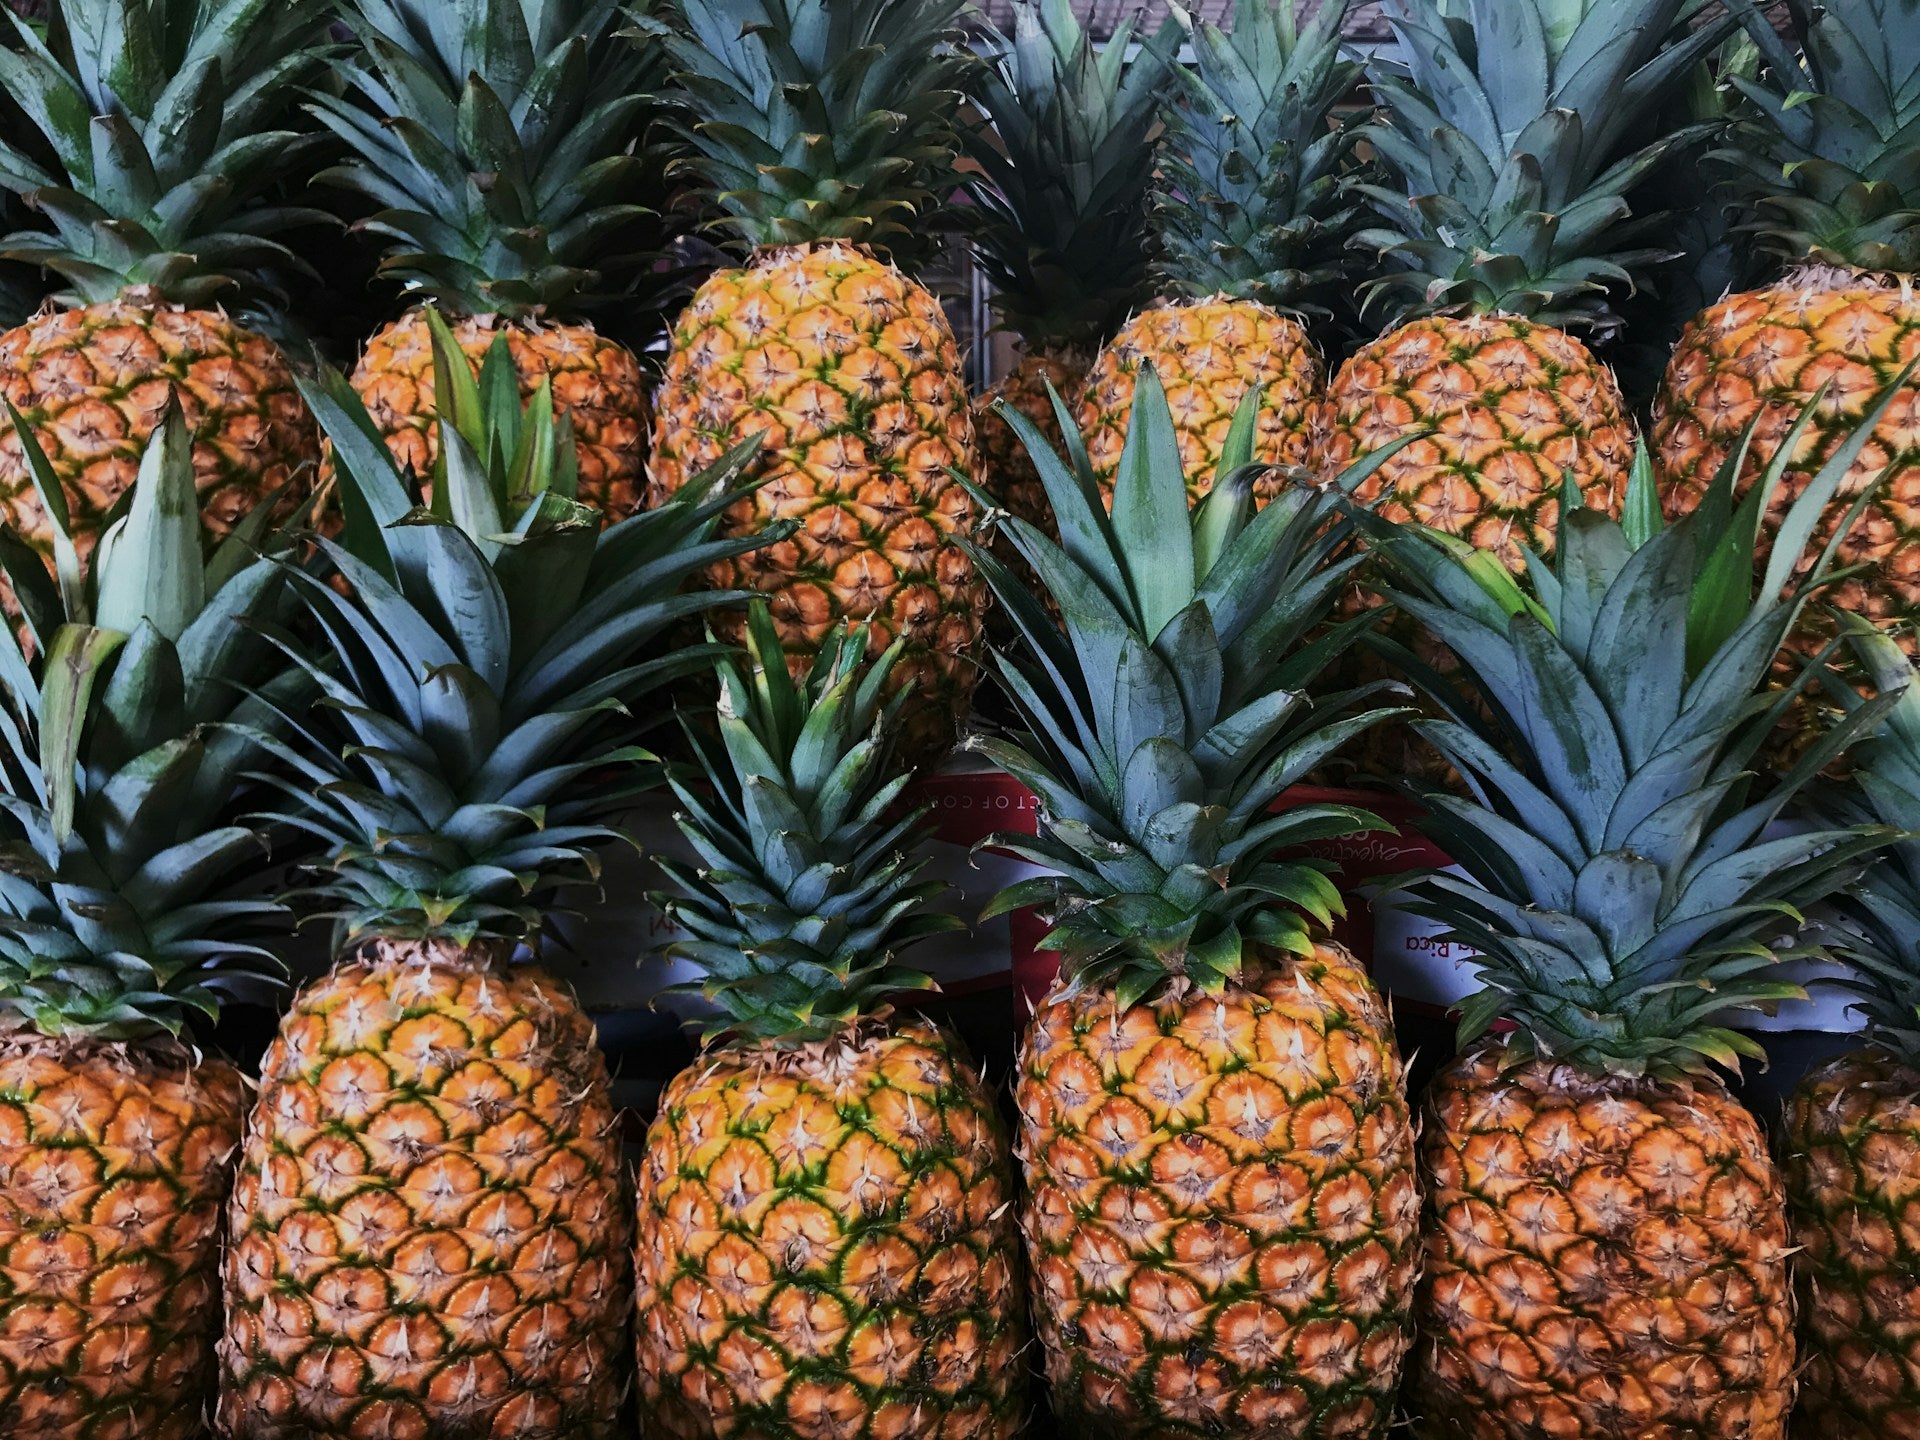 Pineapples lined up together.